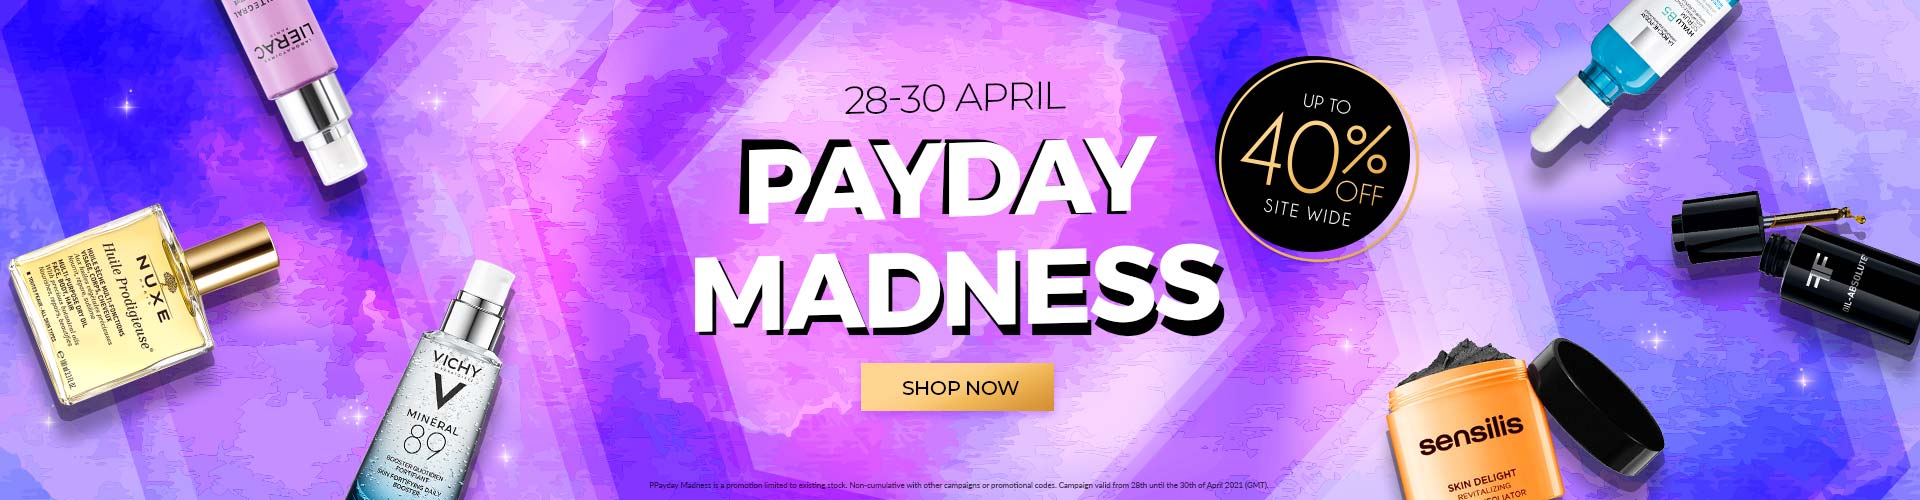 Payday Madness